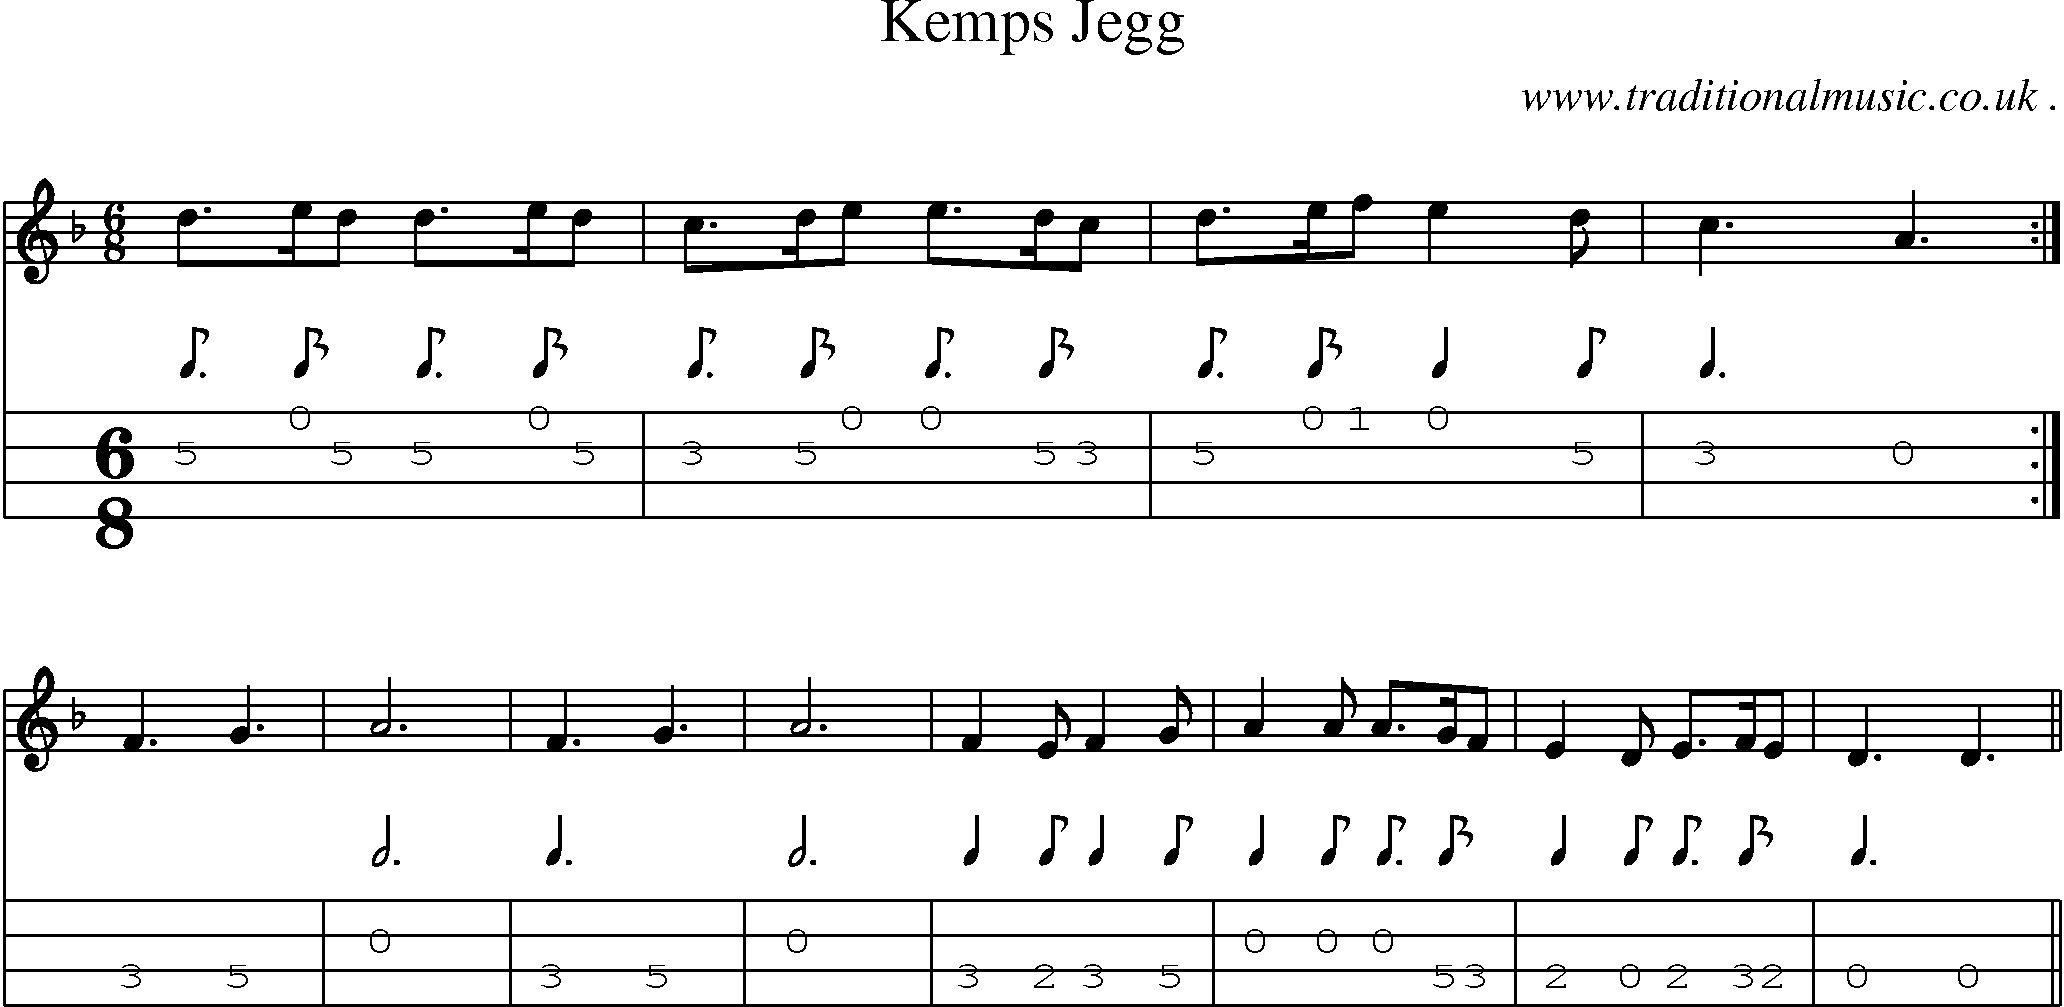 Sheet-music  score, Chords and Mandolin Tabs for Kemps Jegg